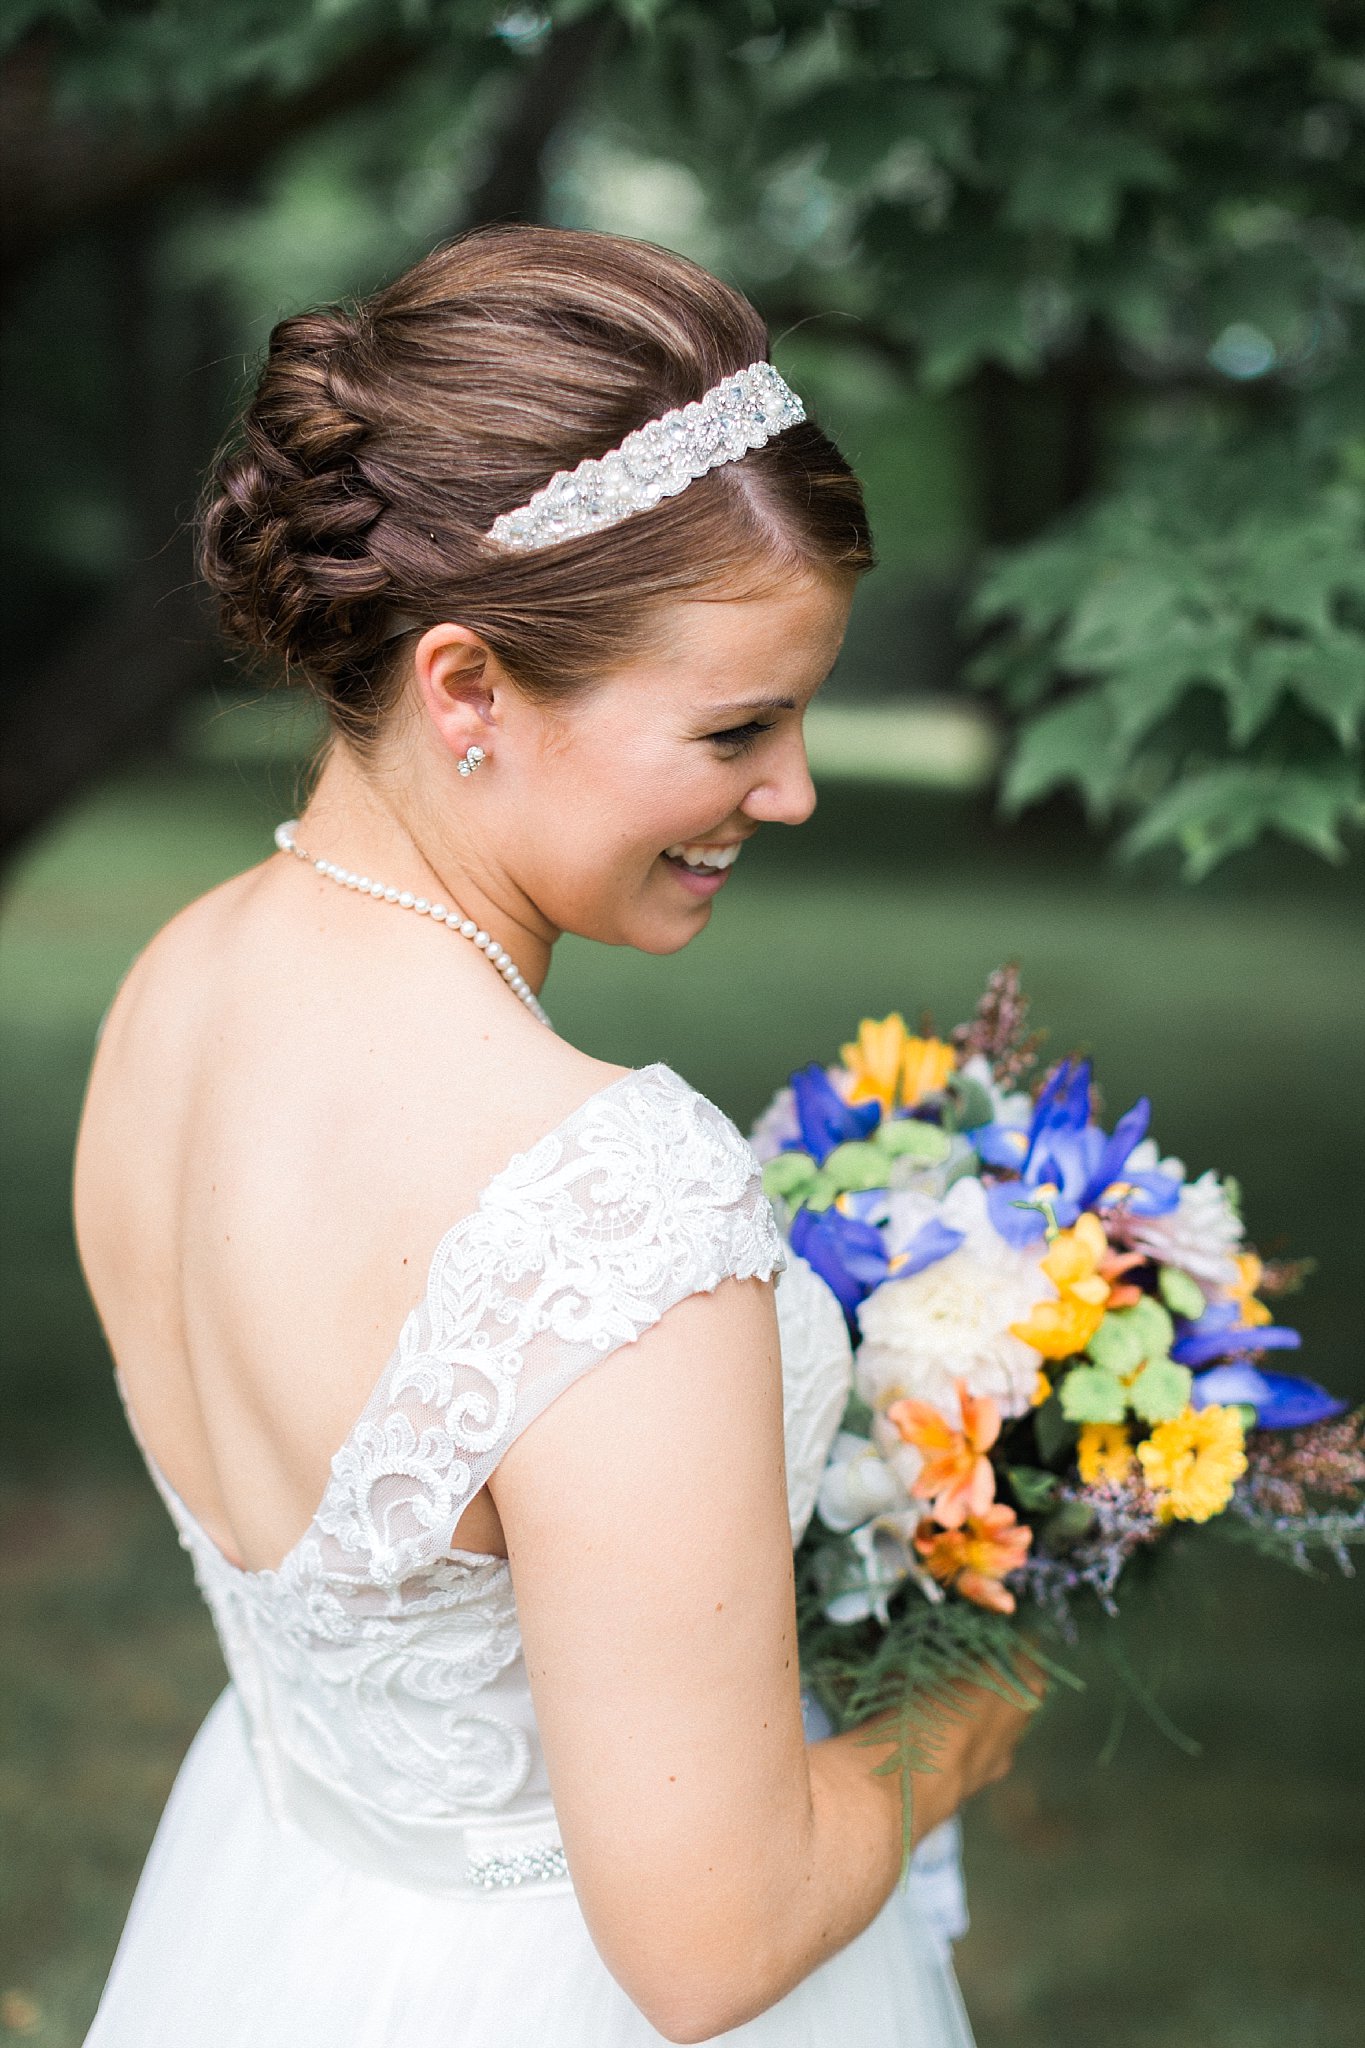 www.james-stokes.com | James Stokes Photography, LLC - bride and bouquet wedding photography